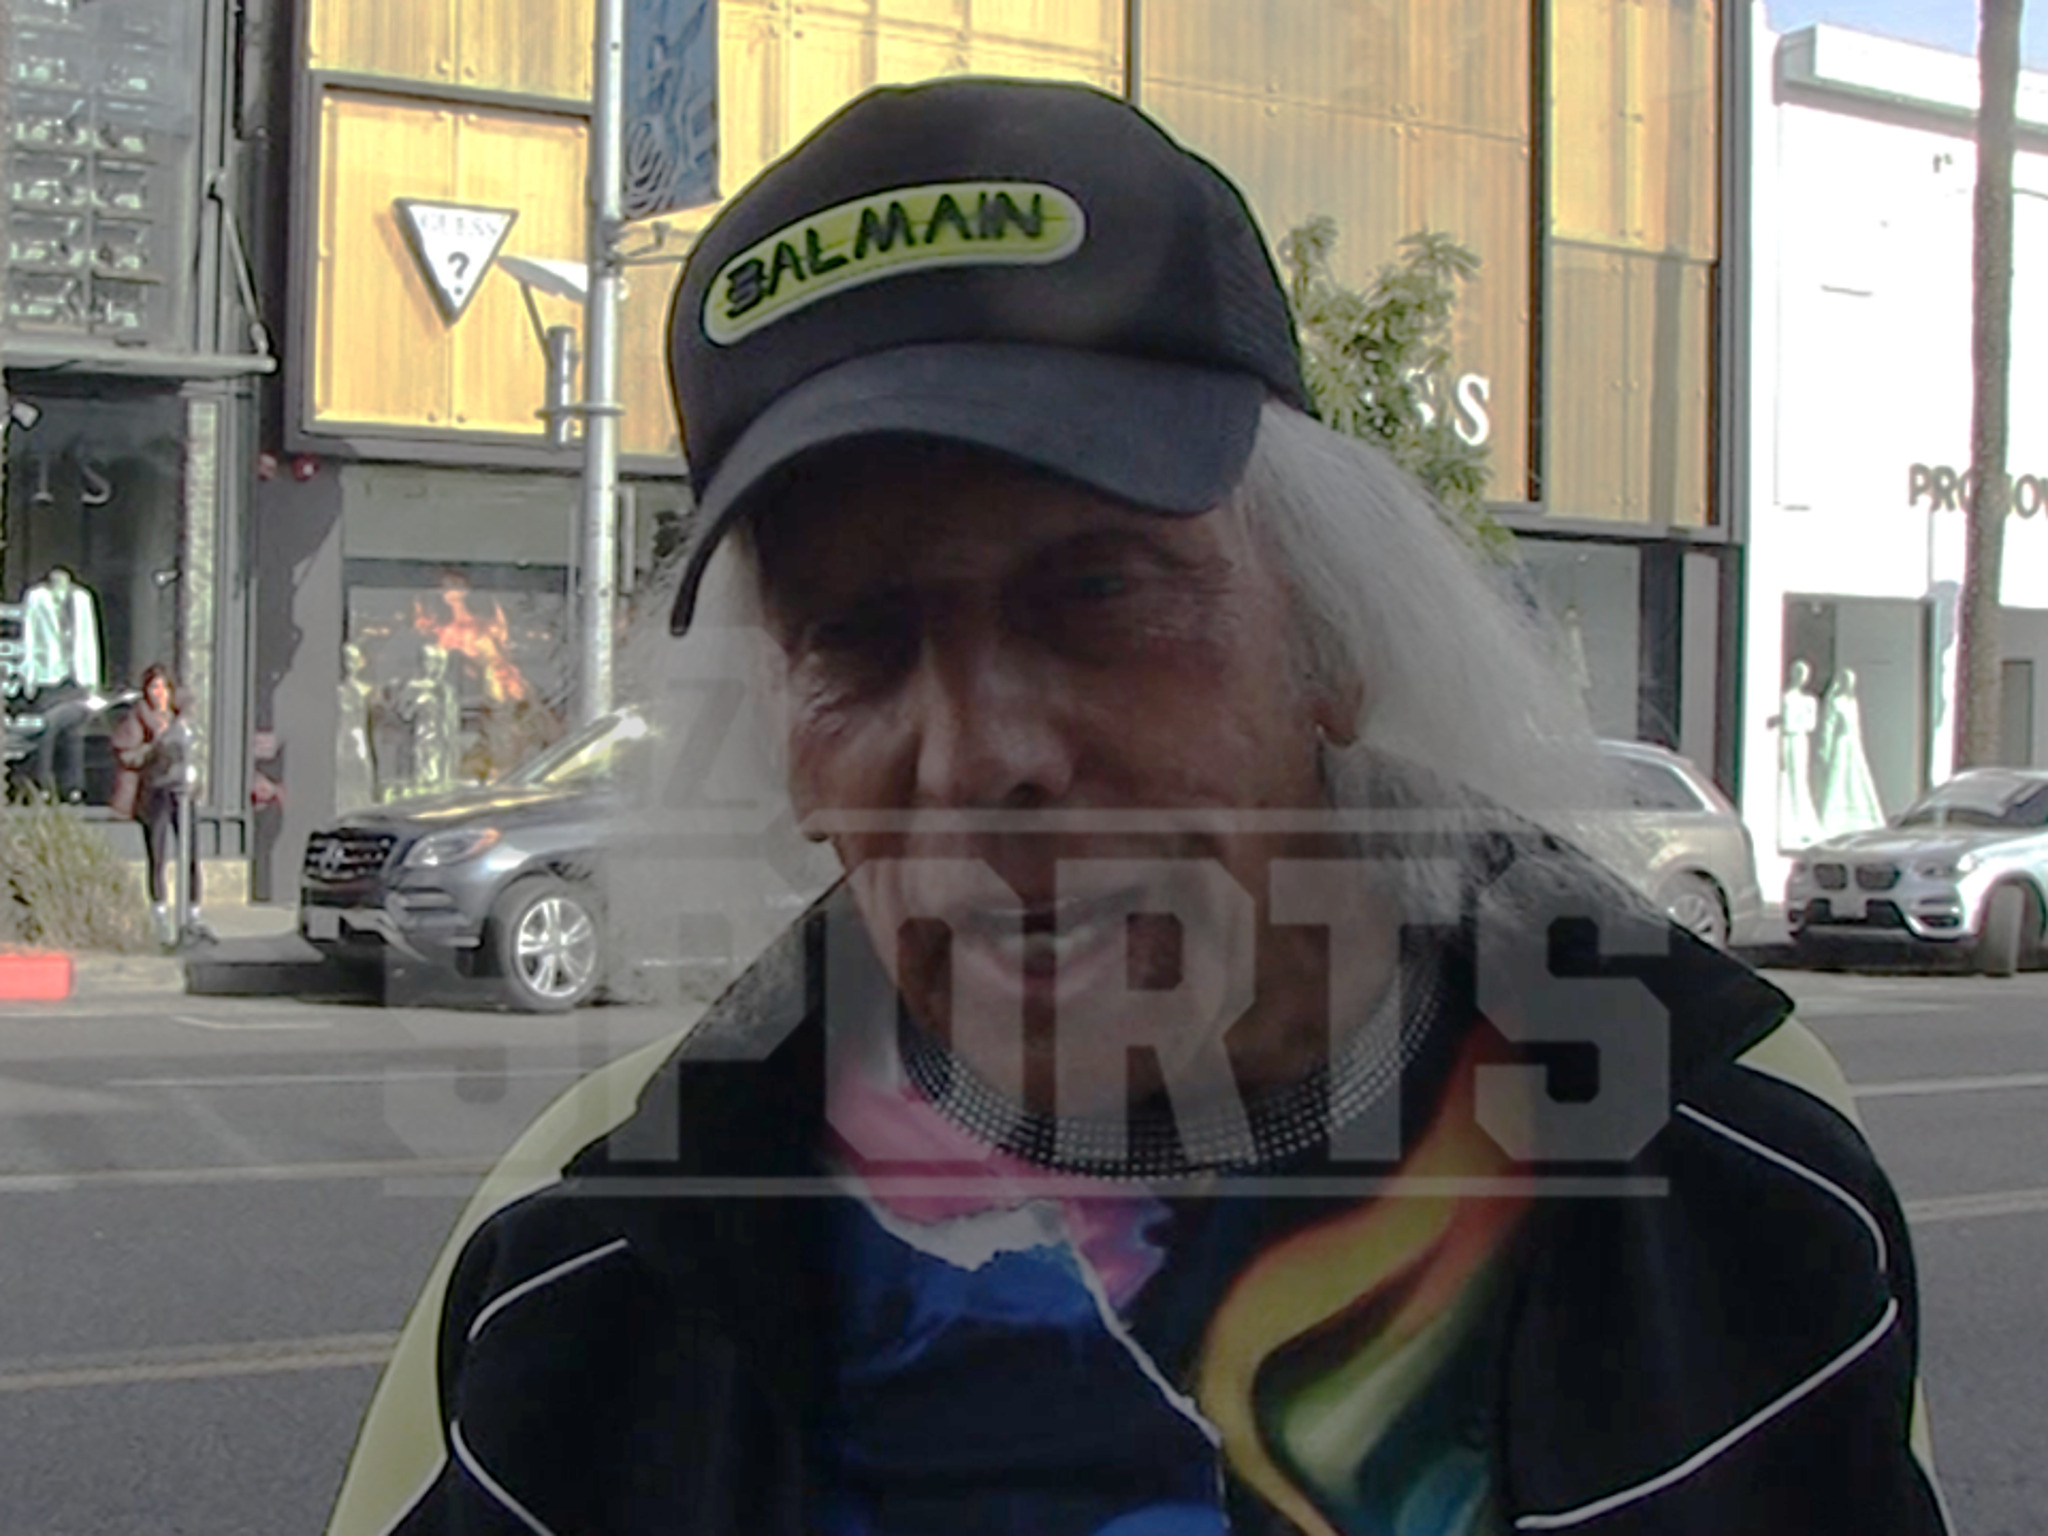 NBA Superfan James F. Goldstein display his jacket outside the